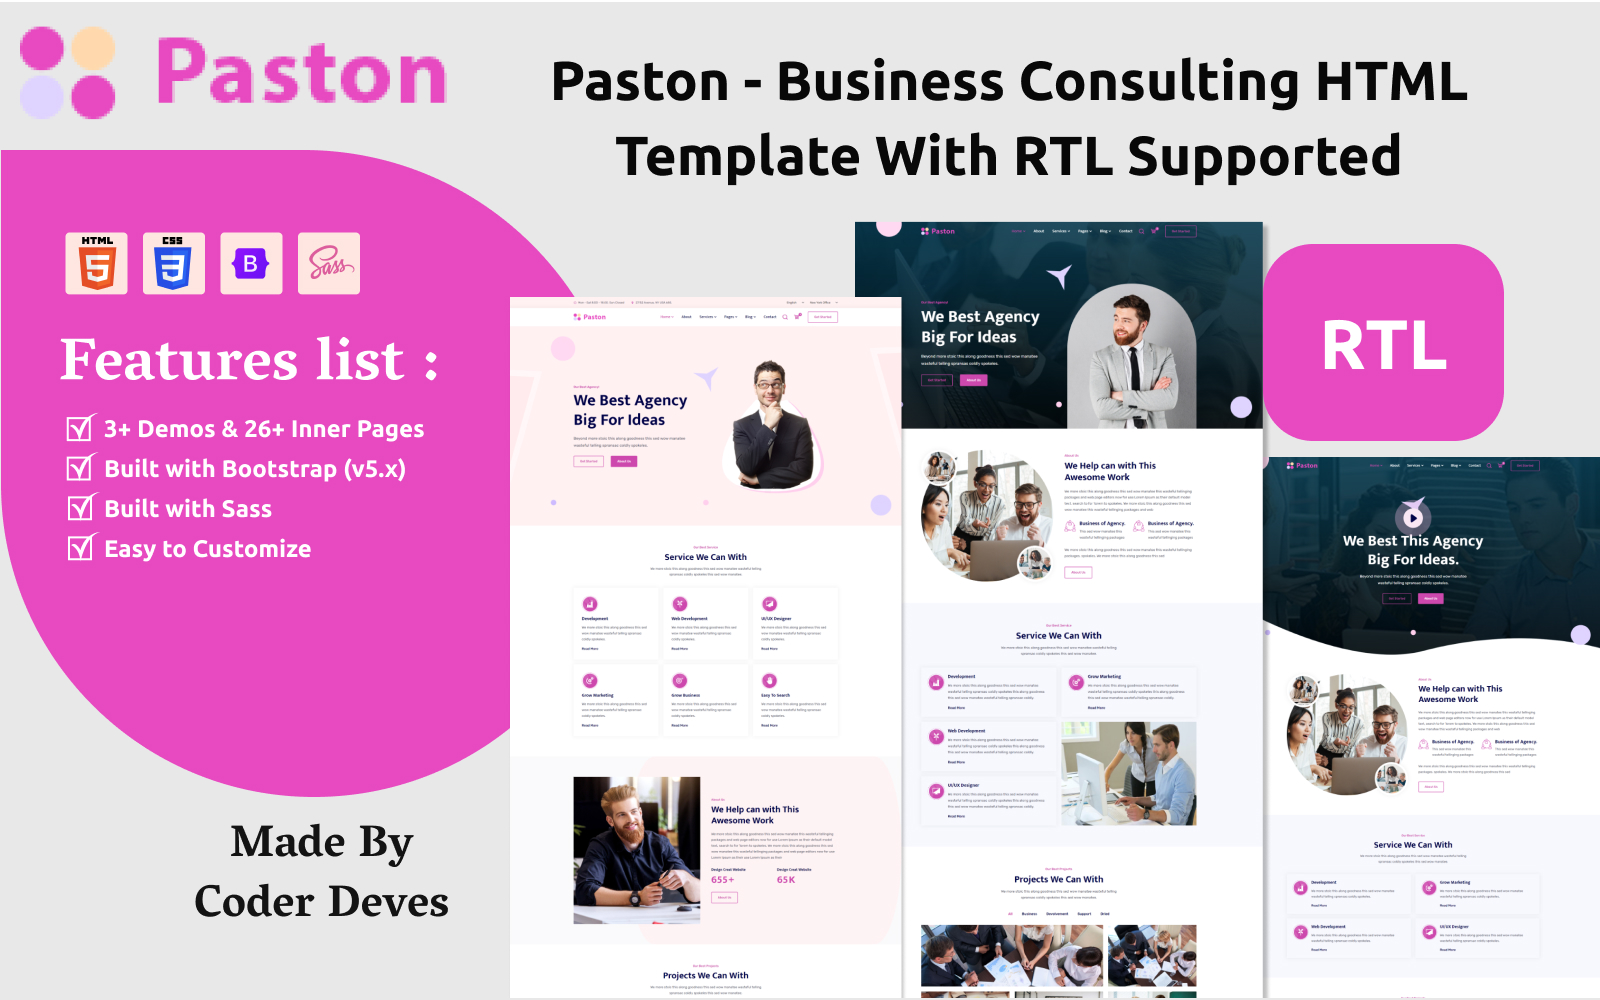 Paston - Business Consulting HTML Template With RTL Supported